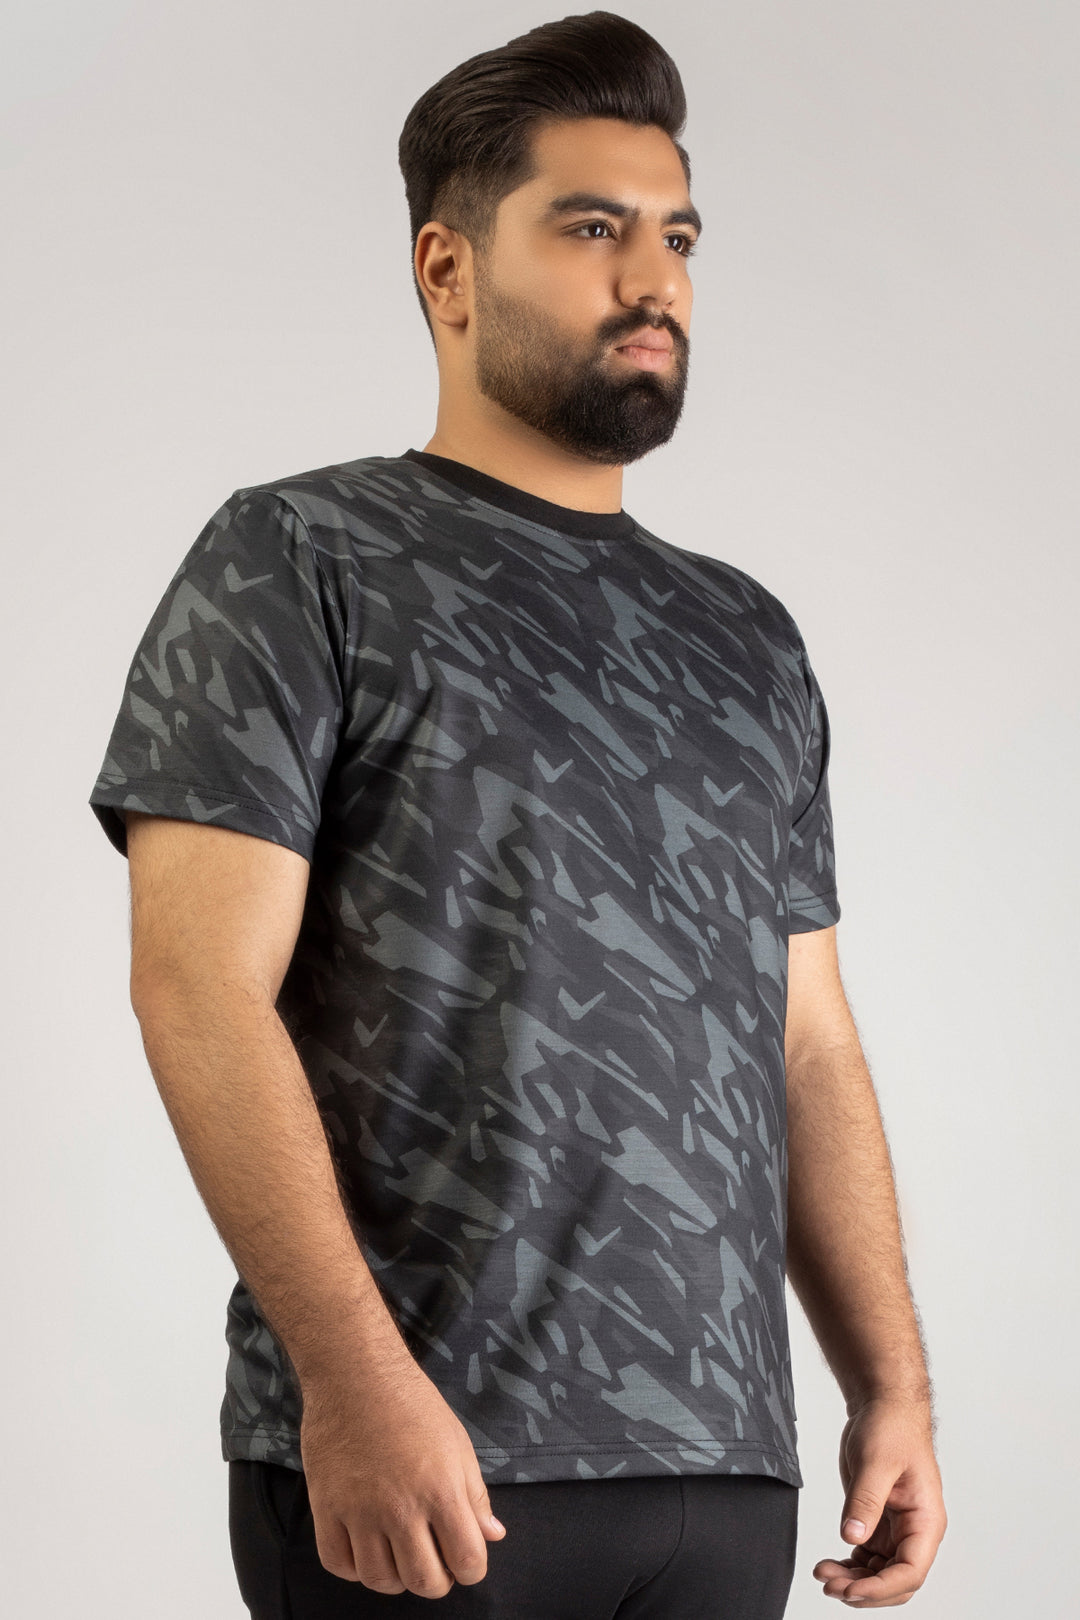 Black & Grey Abstract Printed T-Shirt (Plus size) - A24 - MT0318P